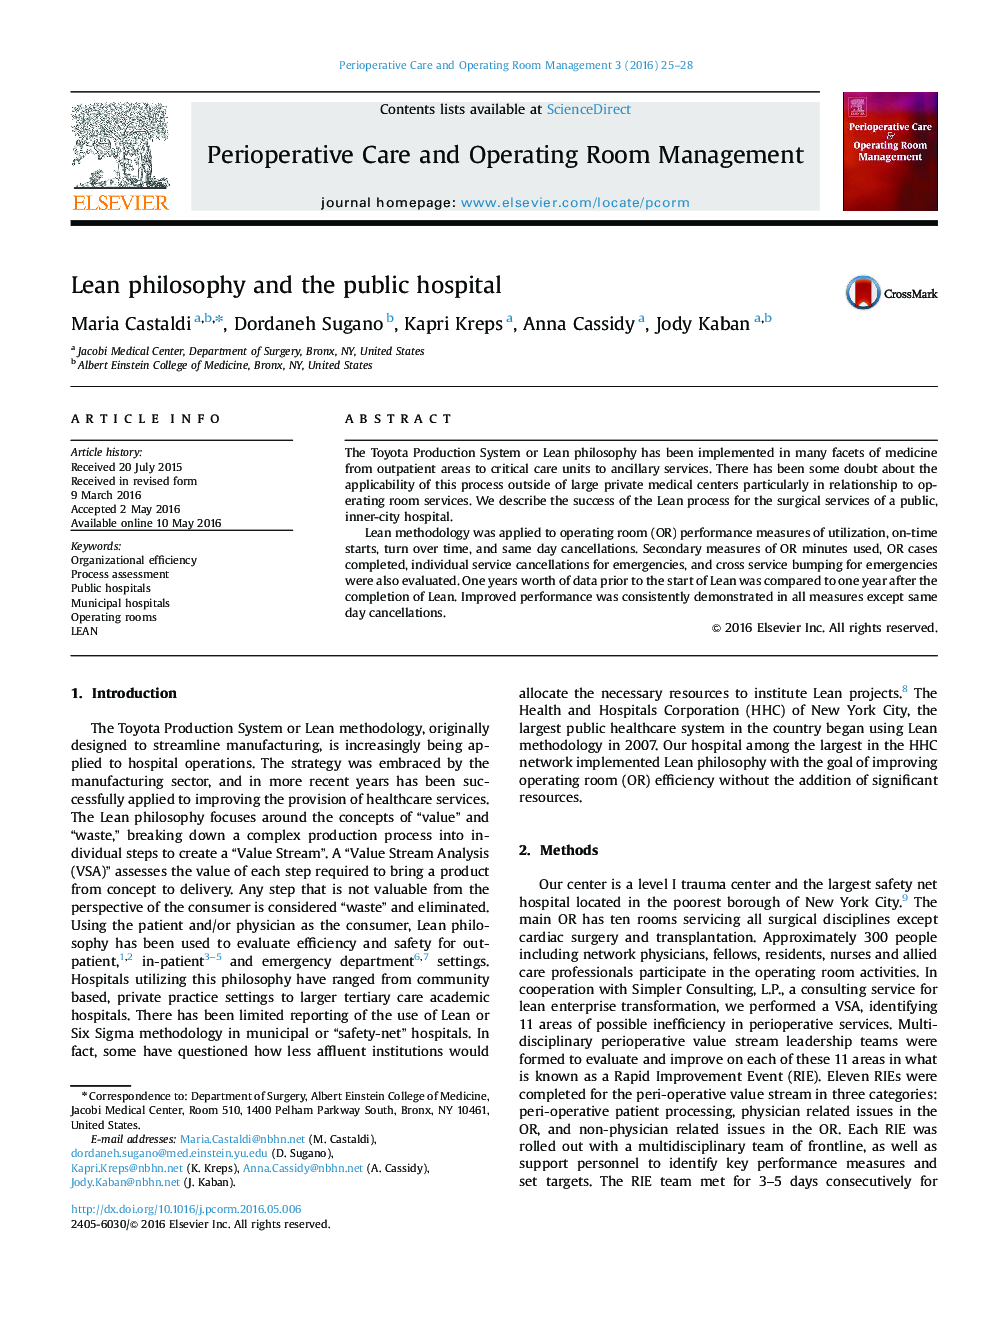 Lean philosophy and the public hospital